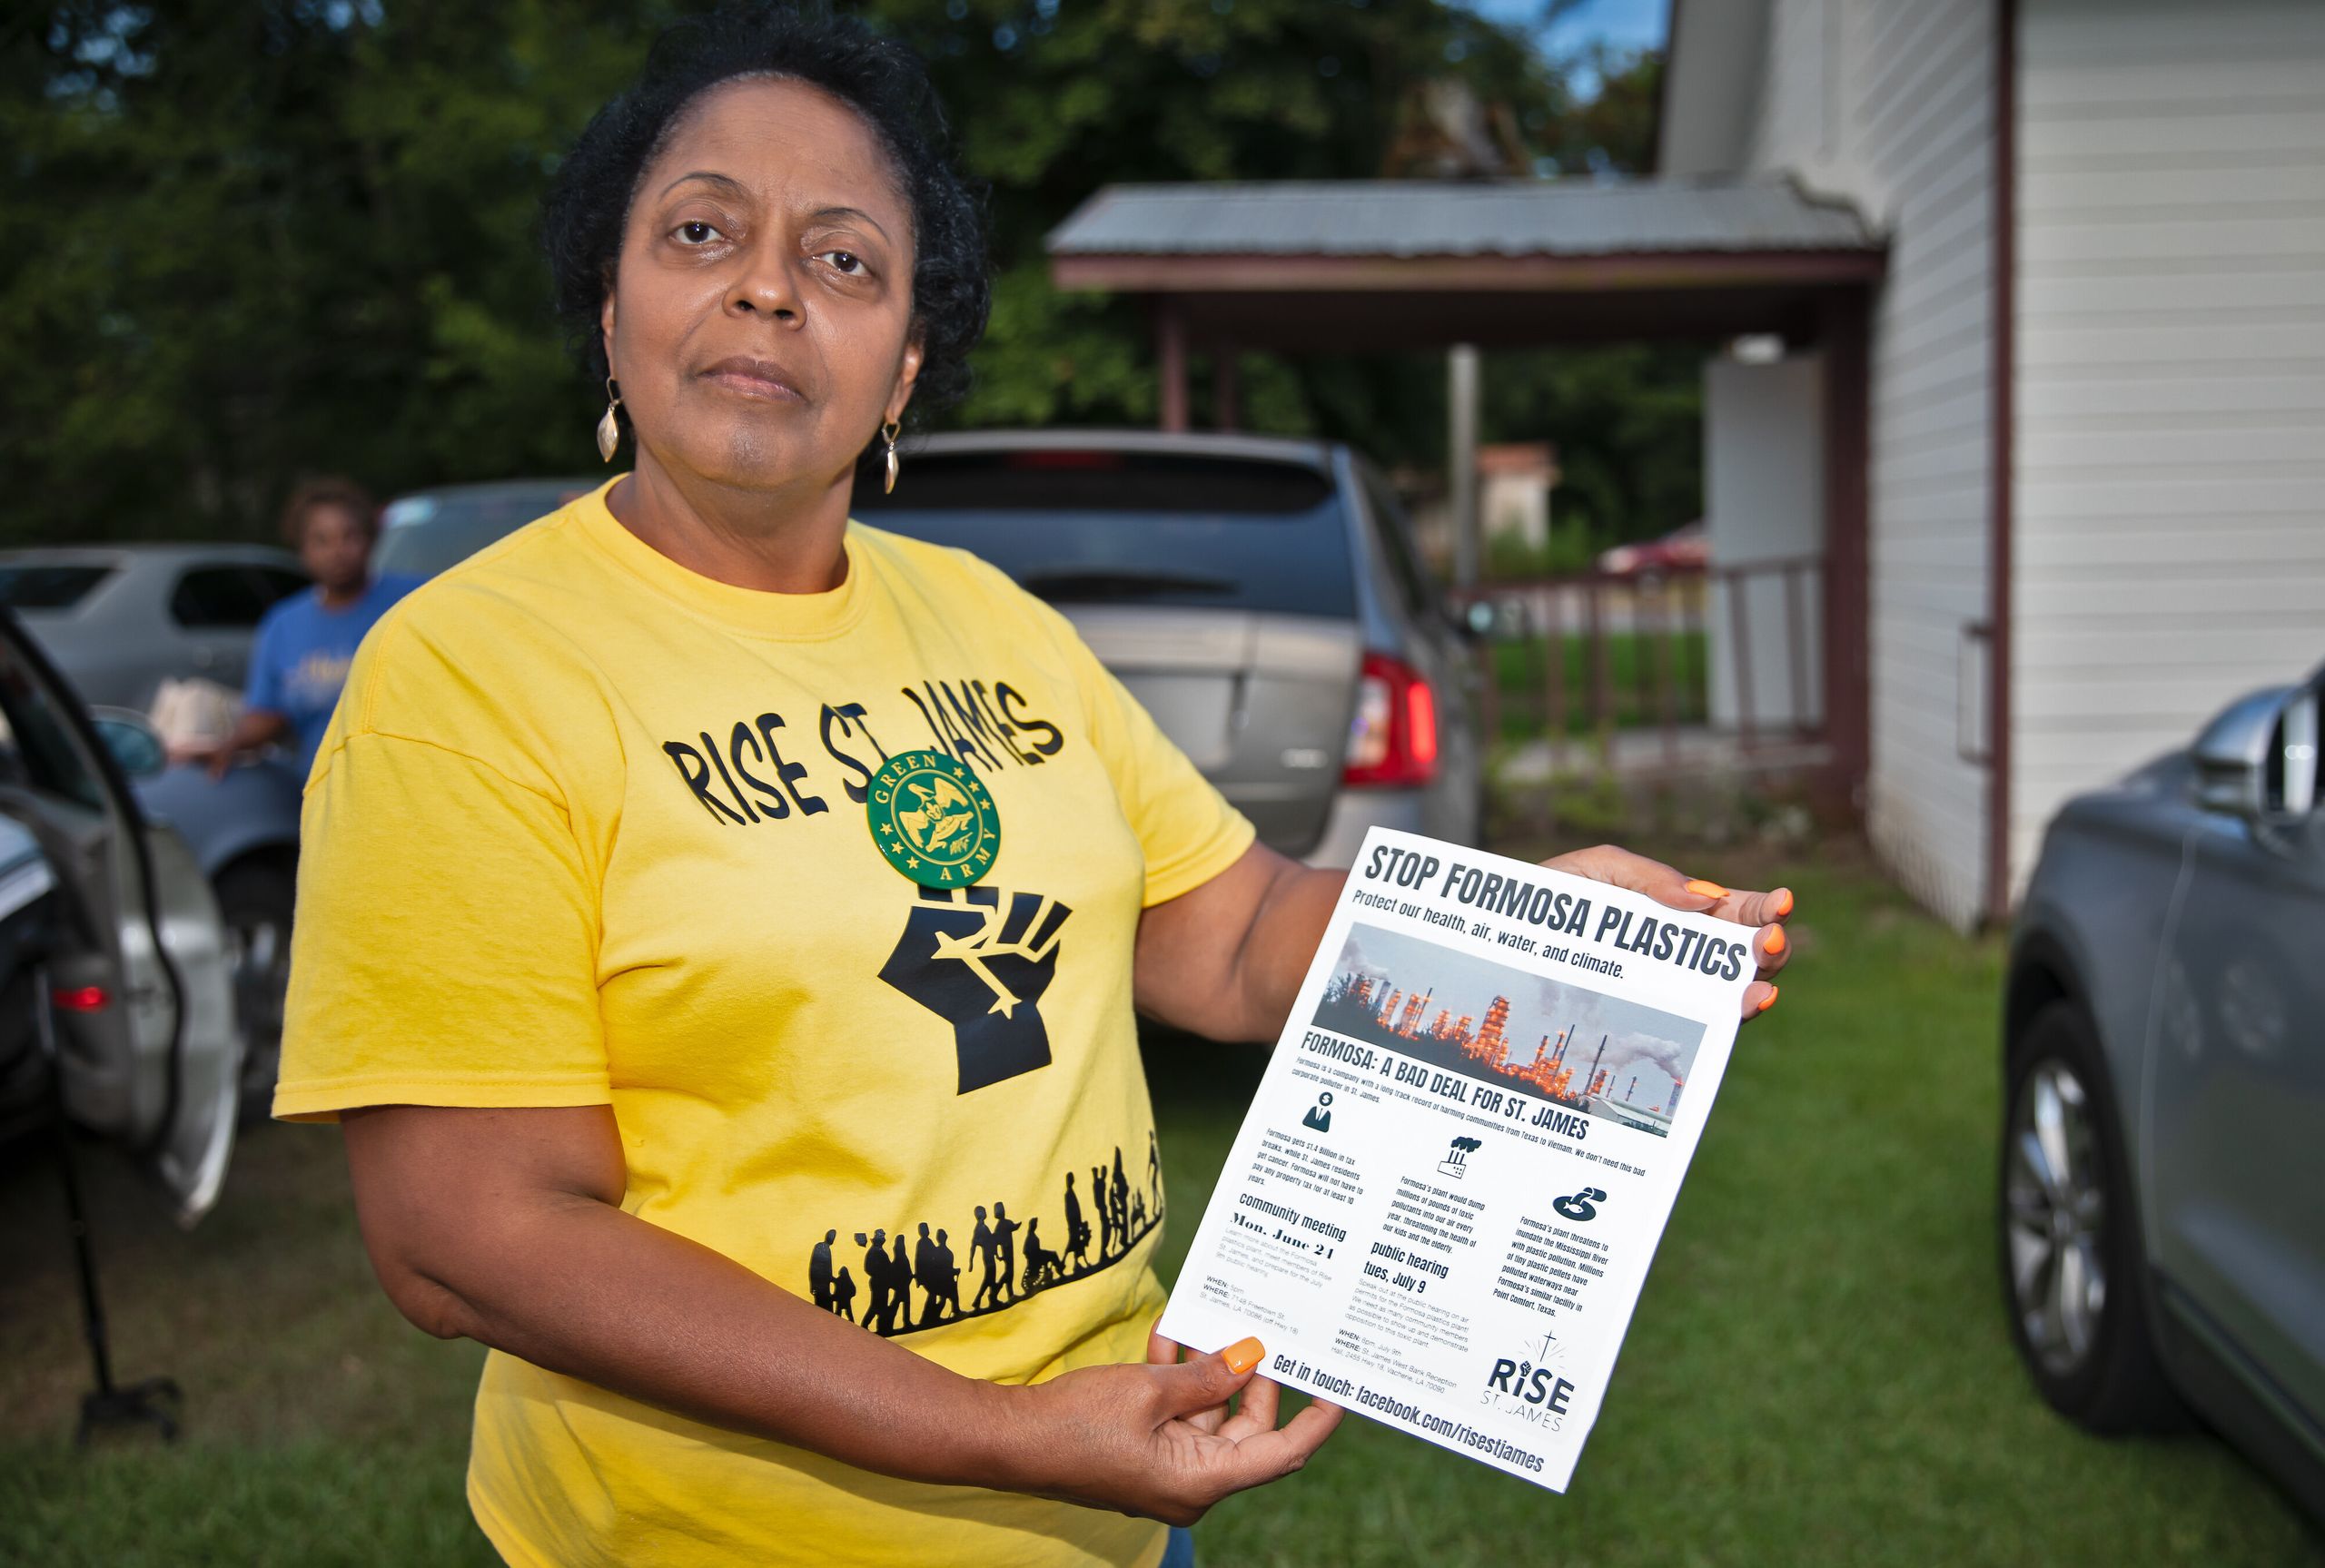 Sharon Lavinge founder of RISE St. James in front of the Mt. Triumph Baptist Church with a flyer about the proposed Formosa p